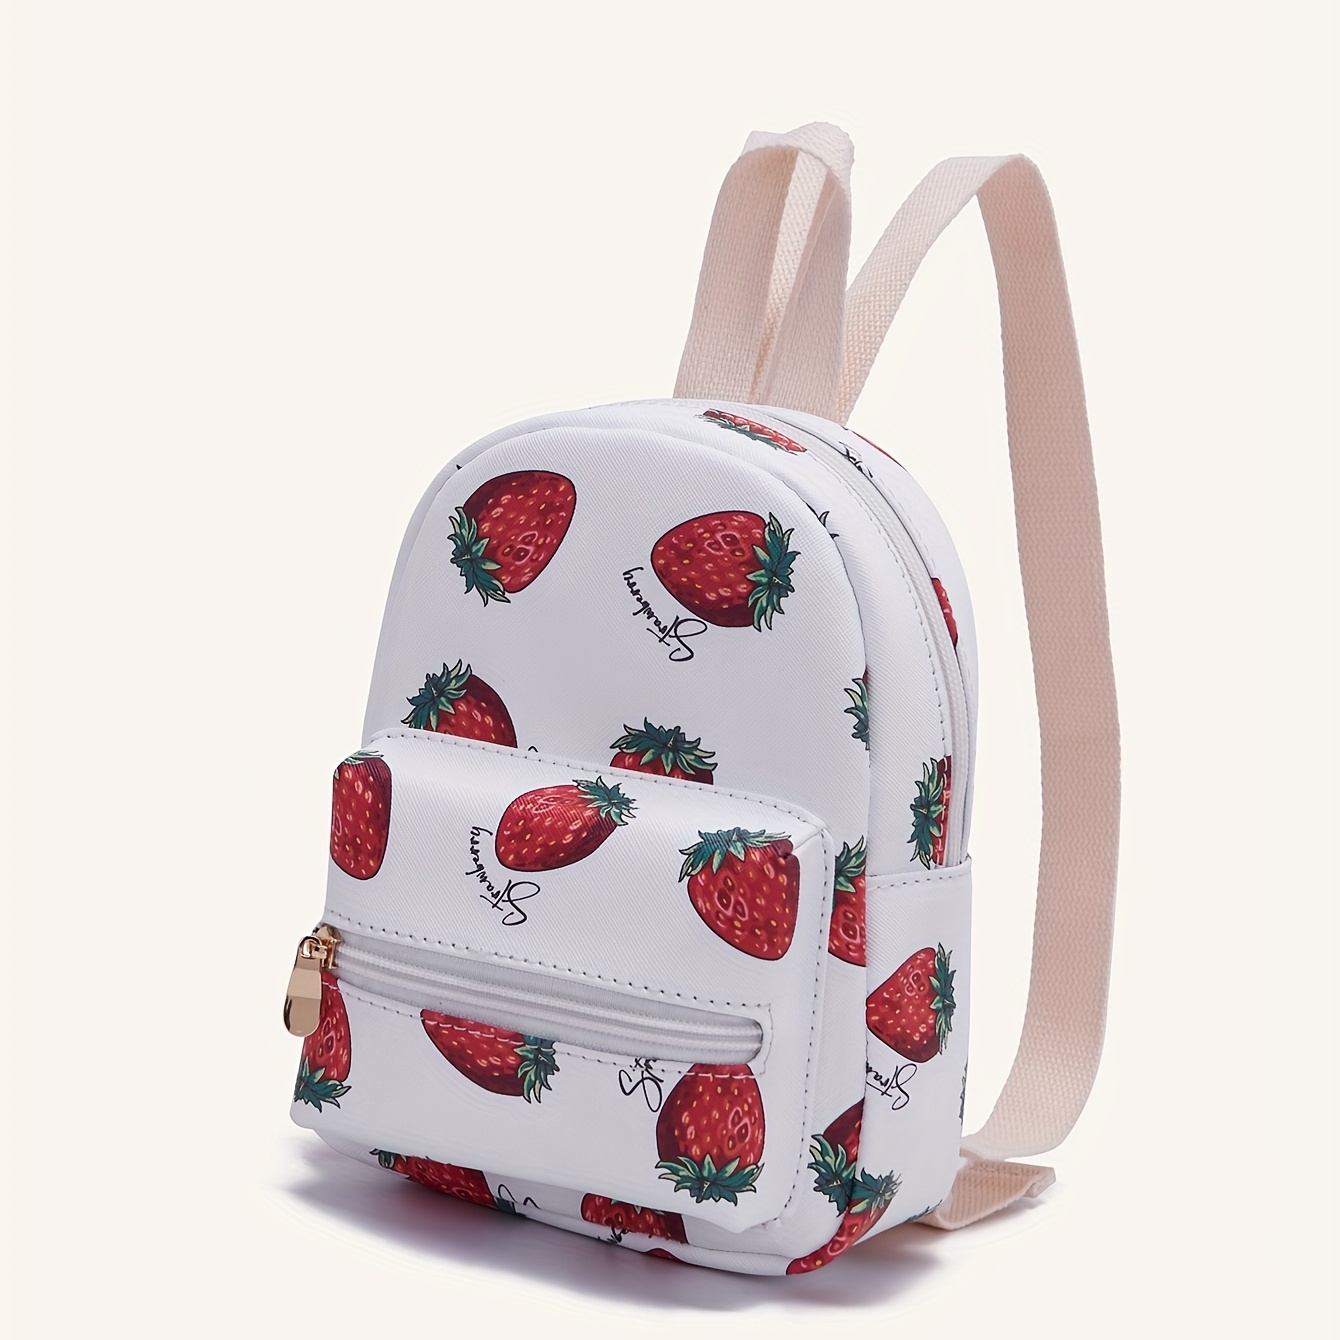 

Cute Strawberry Print Pattern Backpack, Travel Backpack, Ideal Choice For Gifts